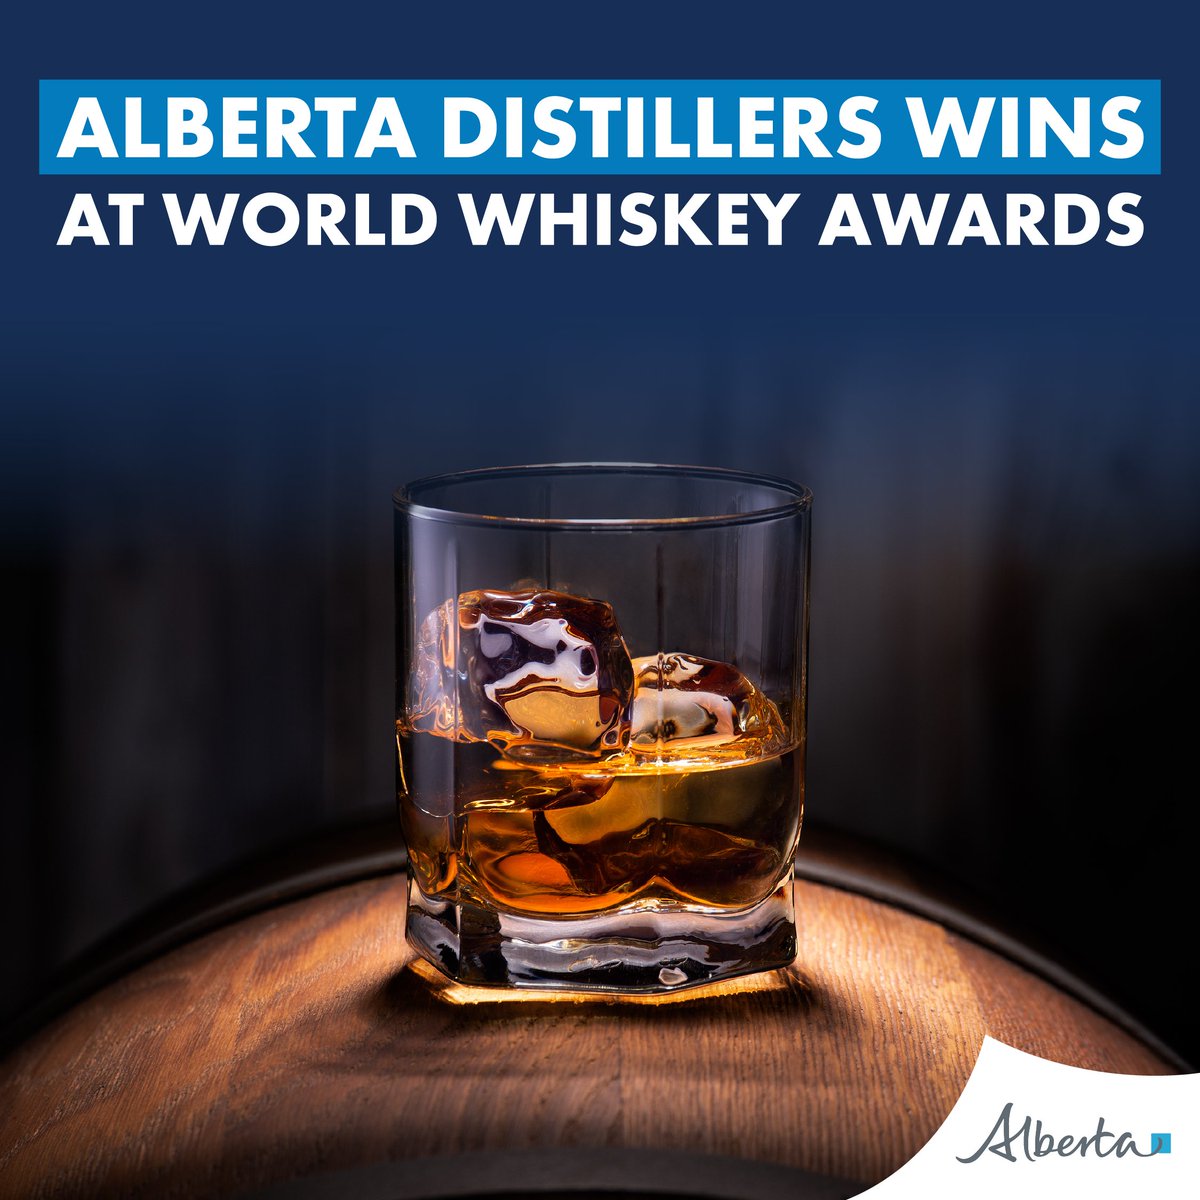 Congratulations to @AnohkaDistilled for winning the World's Best Award for their New Make Young Spirit, and to our Alberta Distillers who brought home a total of 10 medals from the World Whiskies Awards. Truly world-class distillers that provide good quality products and good…